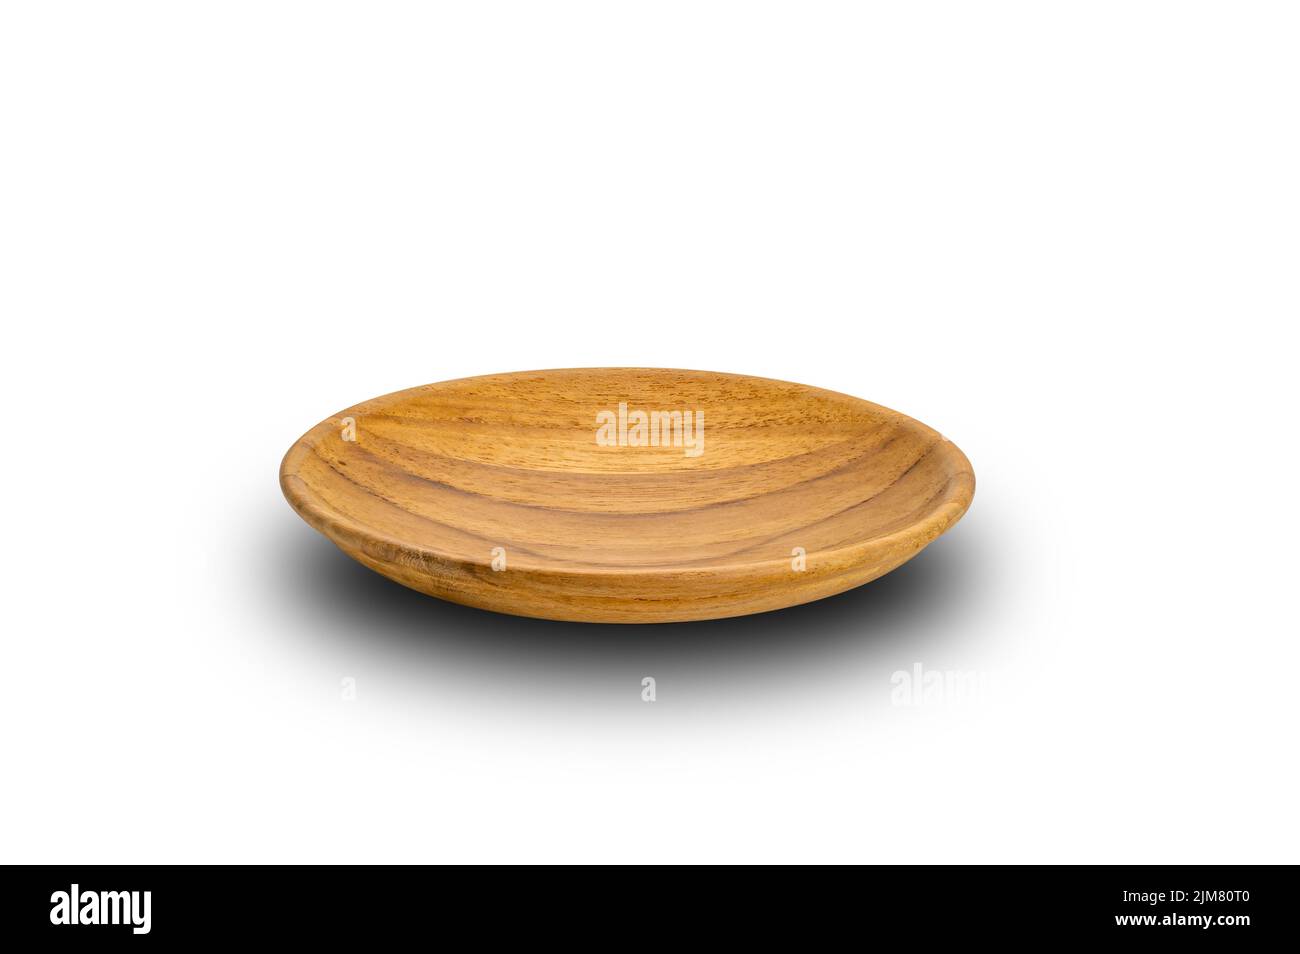 Empty round wooden plate bowl cup isolated on white background with clipping path. Stock Photo